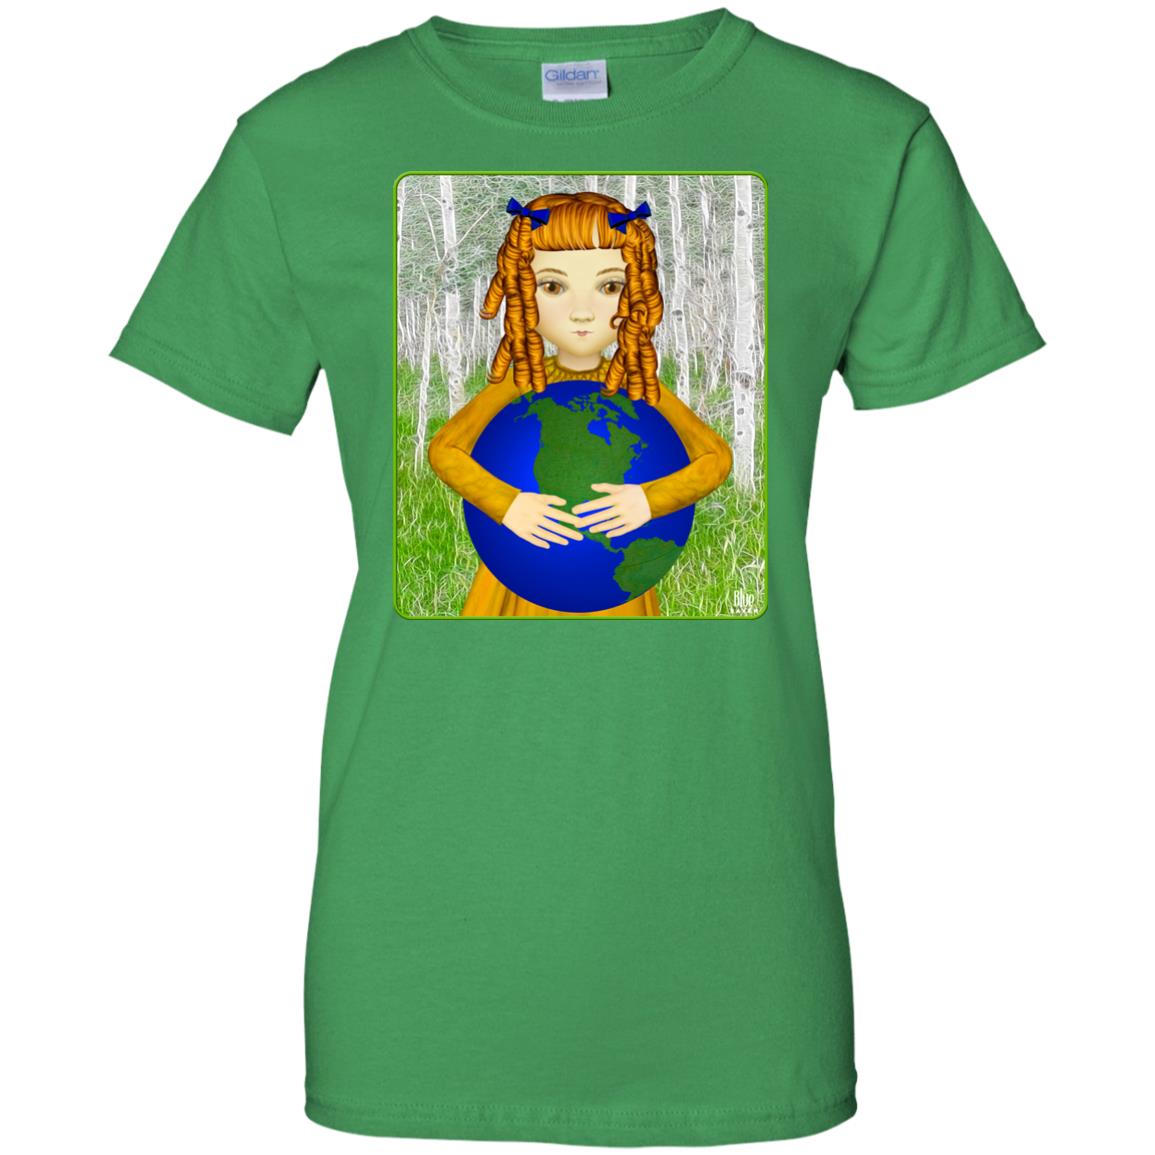 Save My World - Women's Relaxed Fit T-Shirt